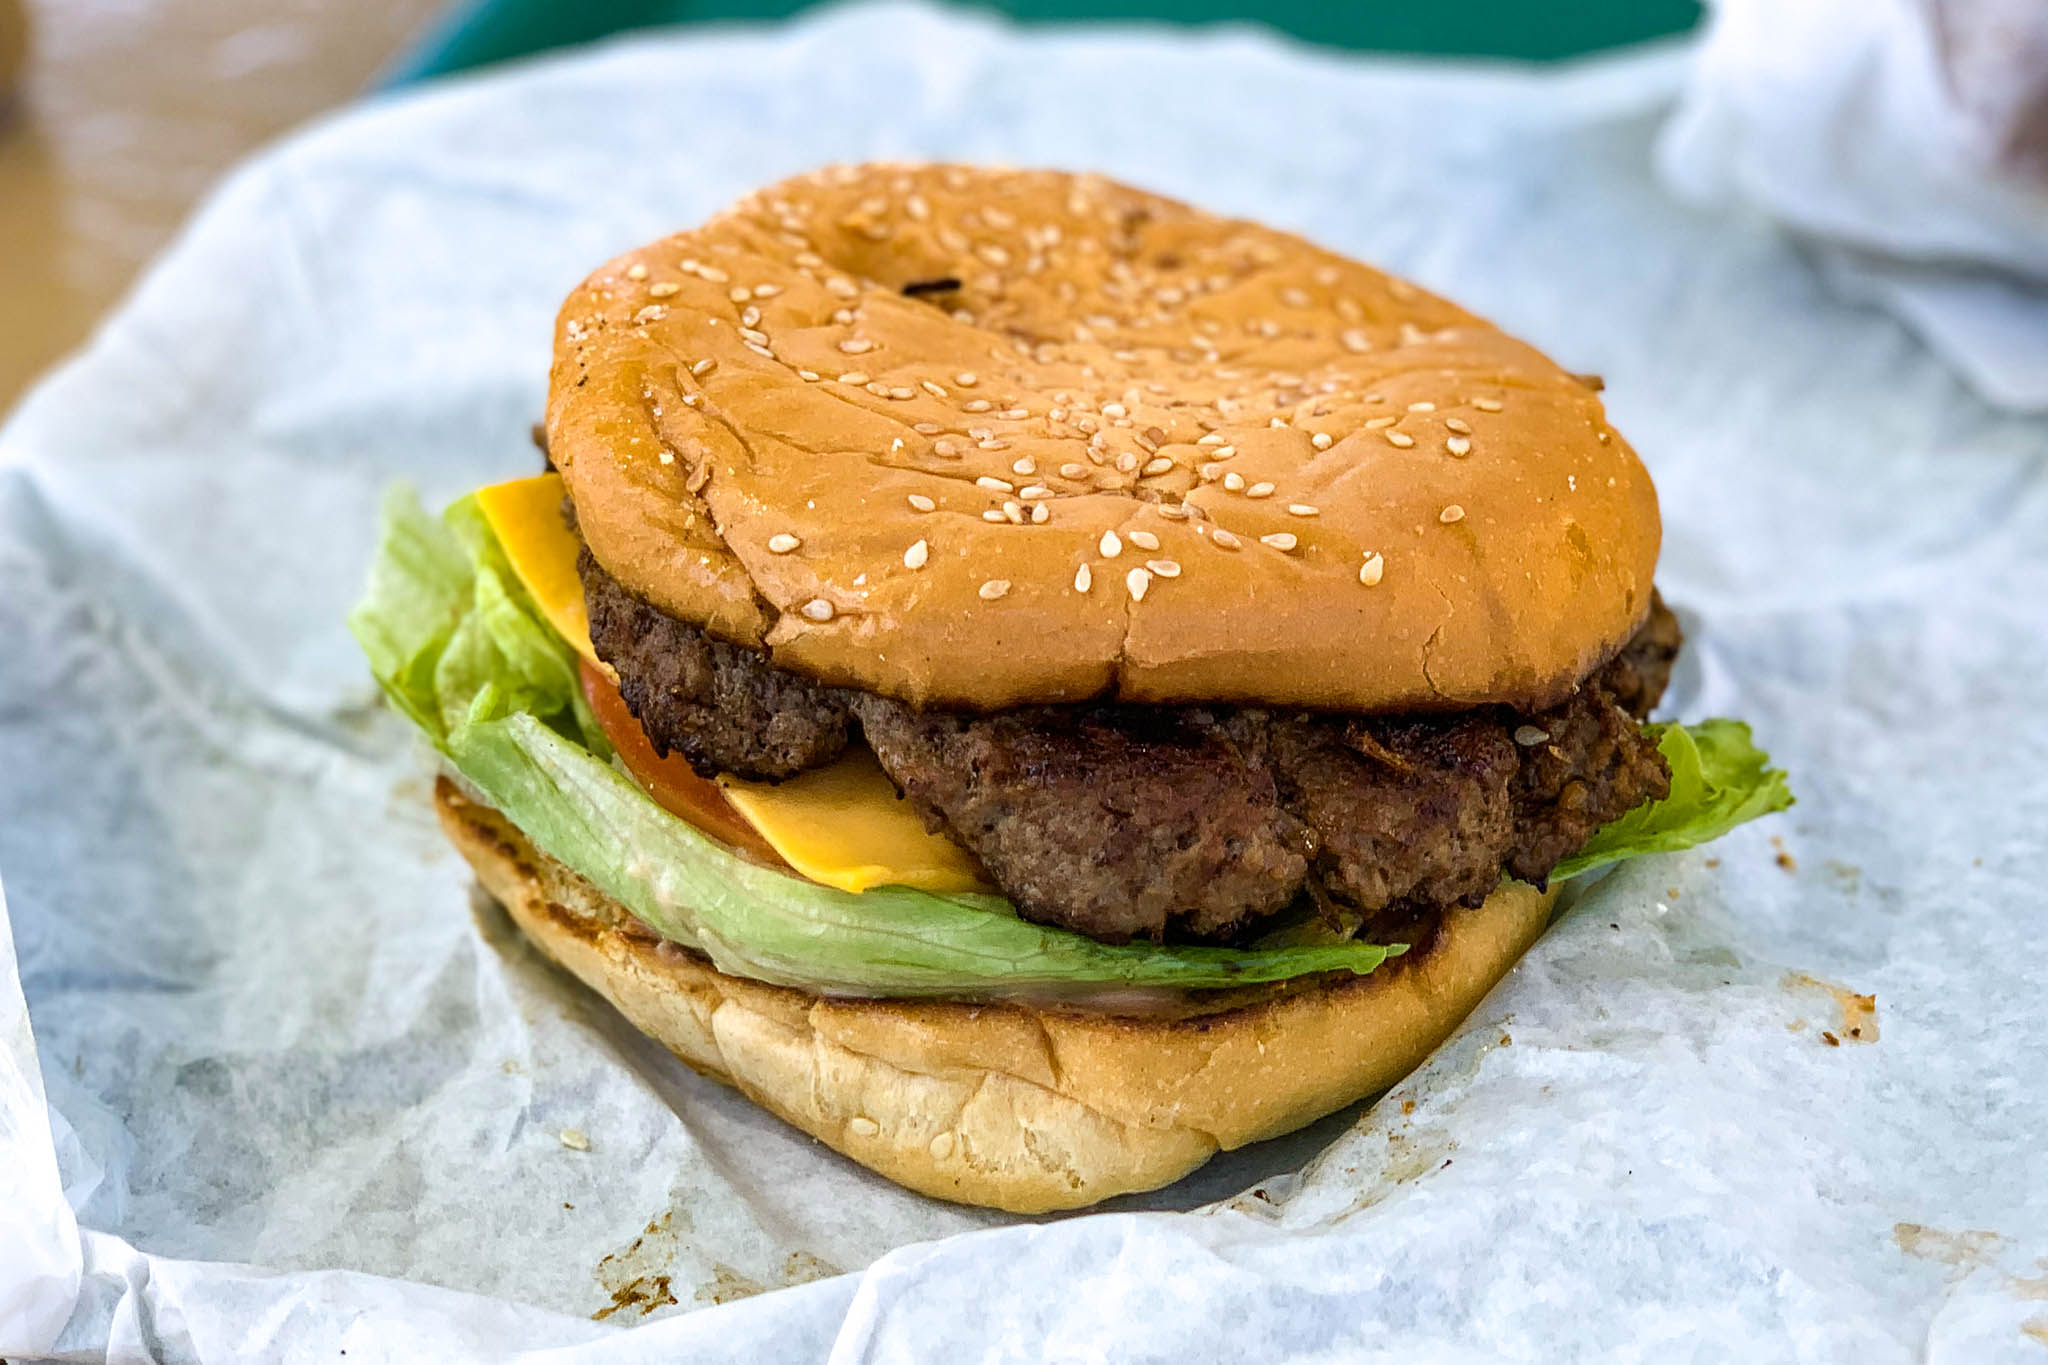 Nessy Burgers in Fallbrook, period | San Diego Reader